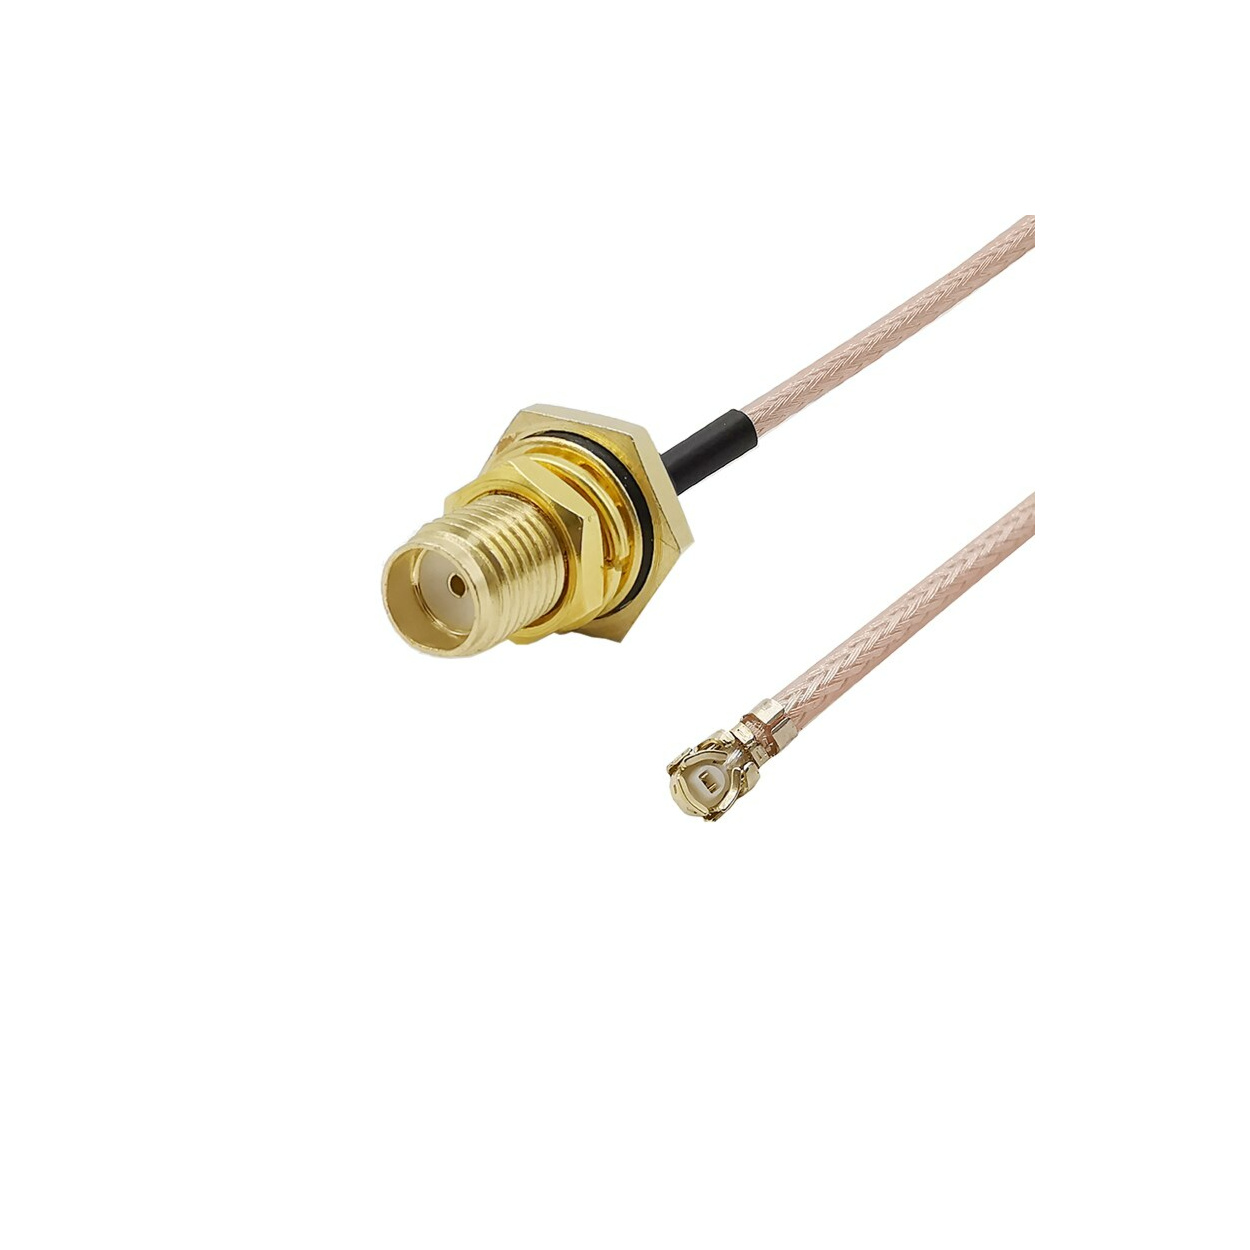 Probots to SMA Interface Connector Cable 15 cm Buy Online India